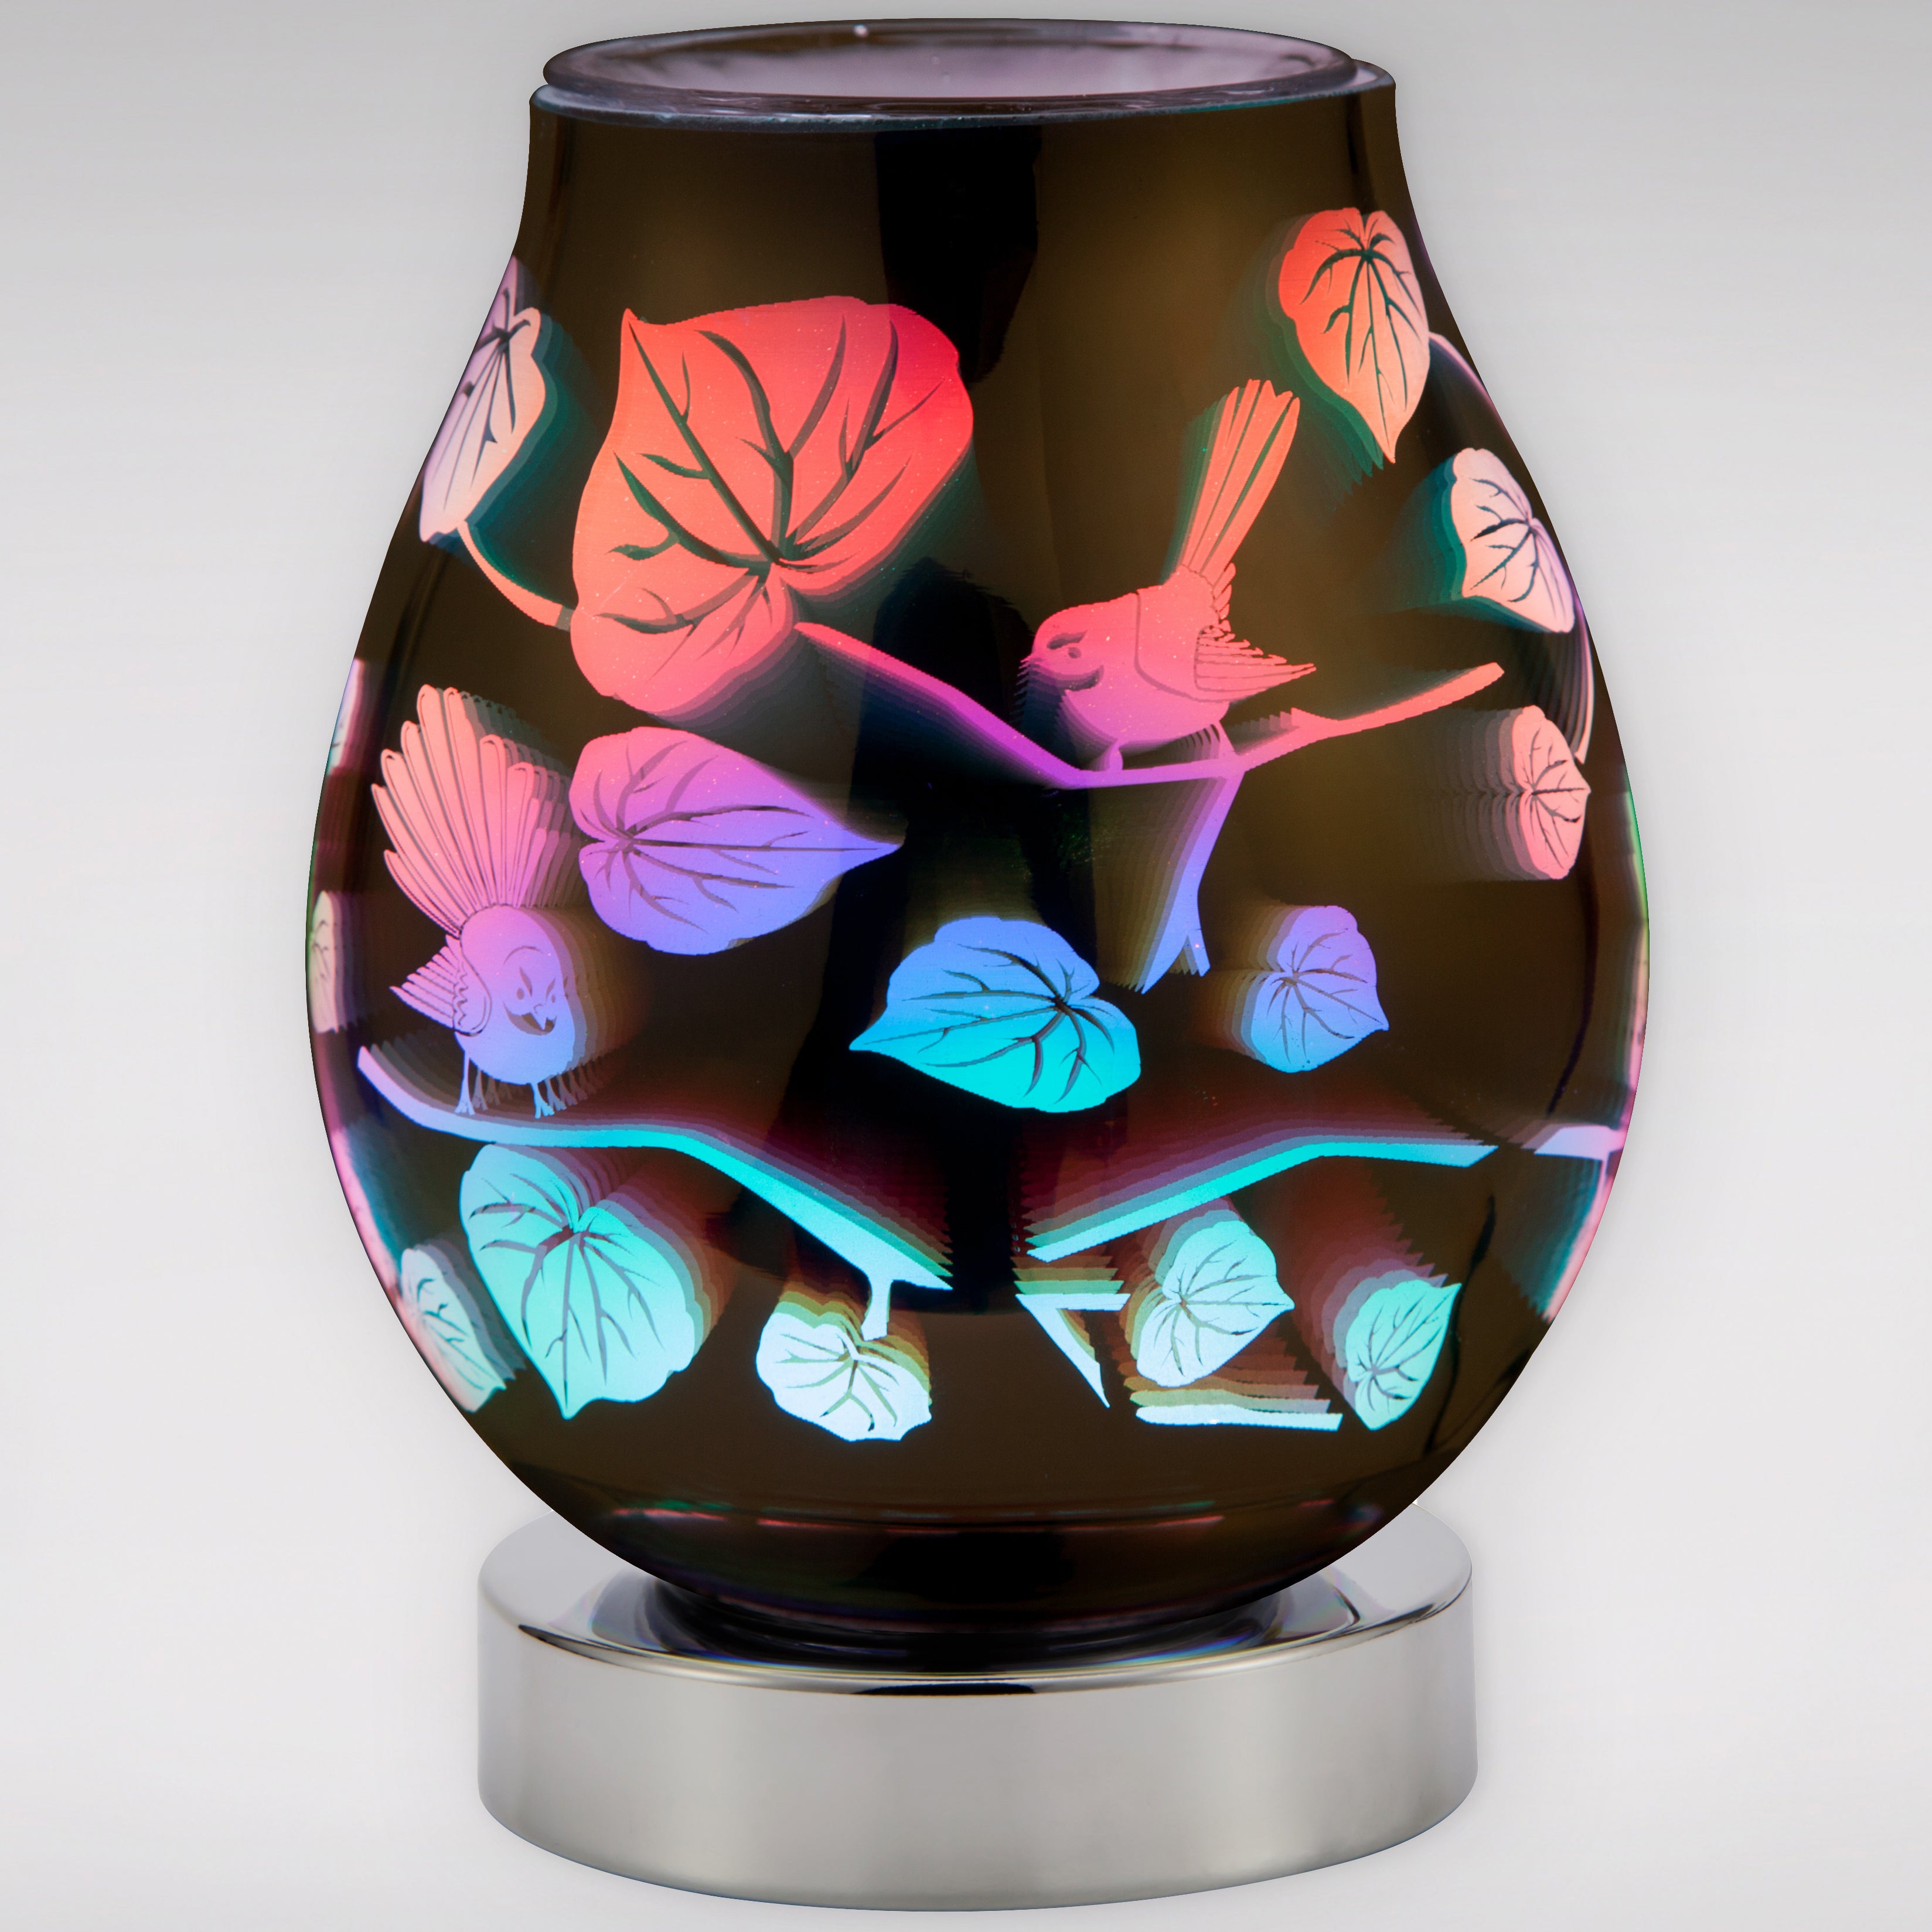 Scentchips Warmer with LED 'Fantail' Colour Changing Display